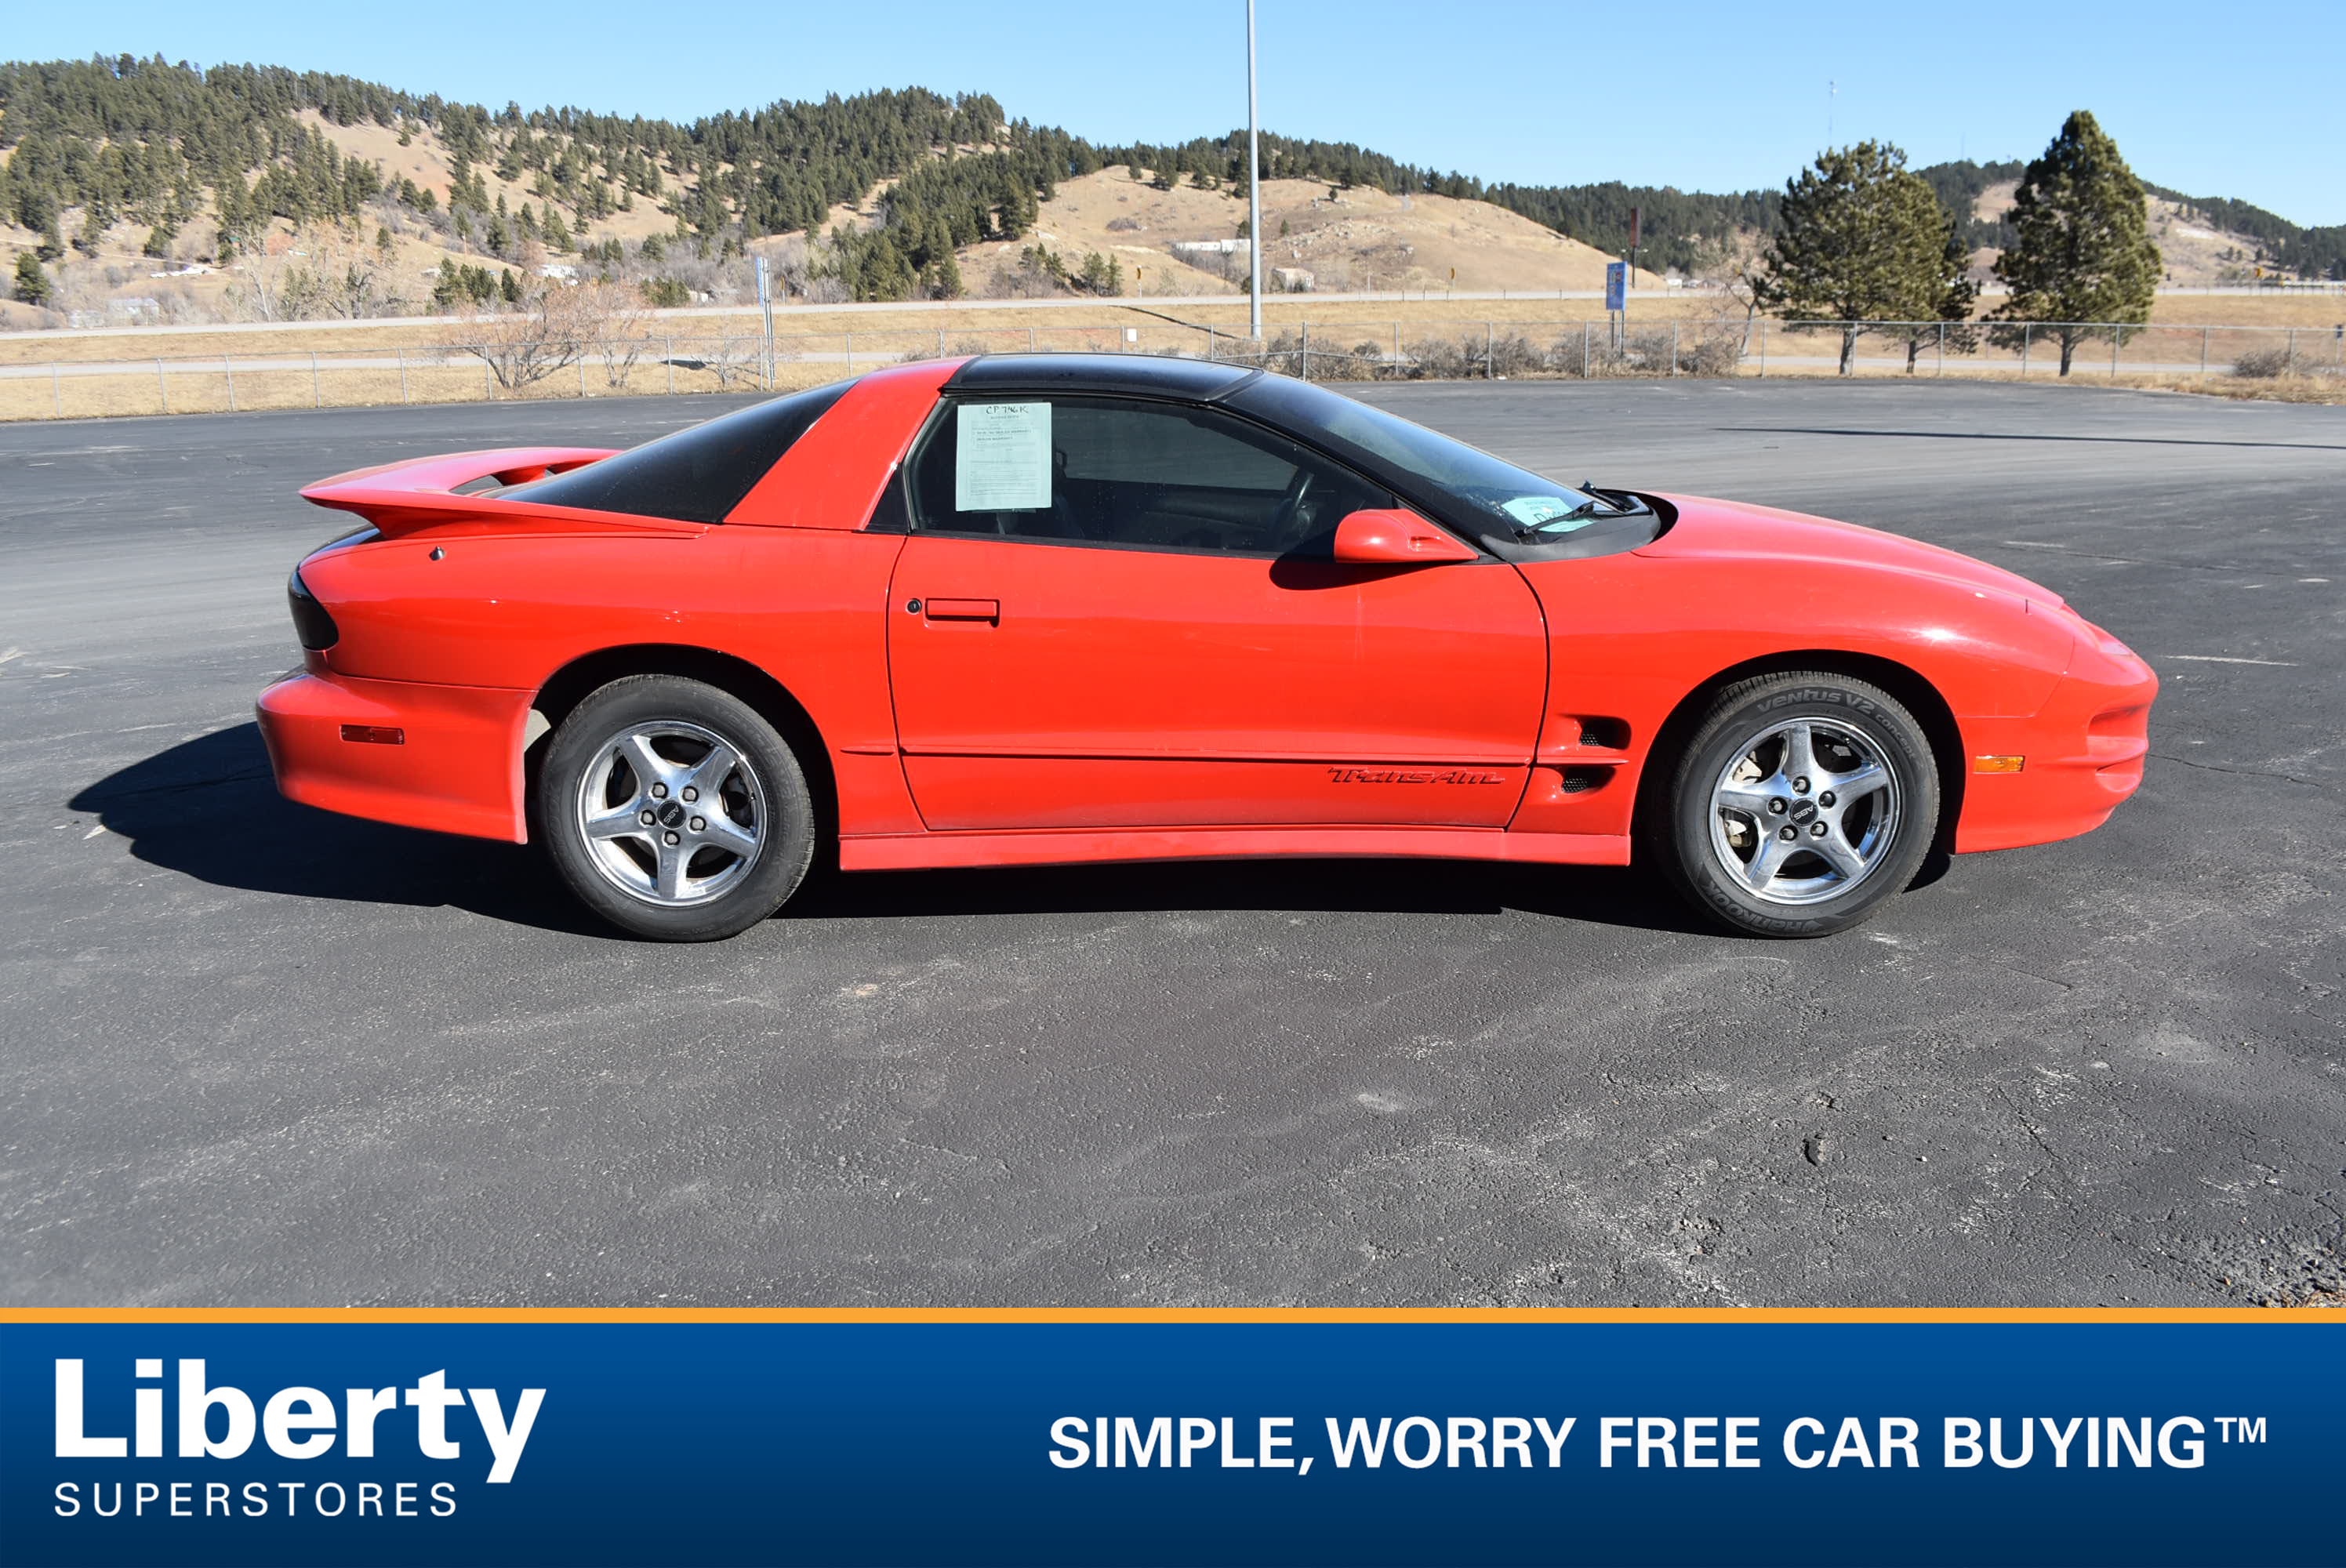 Used 2000 Pontiac Firebird Trans Am with VIN 2G2FV22GXY2115852 for sale in Rapid City, SD